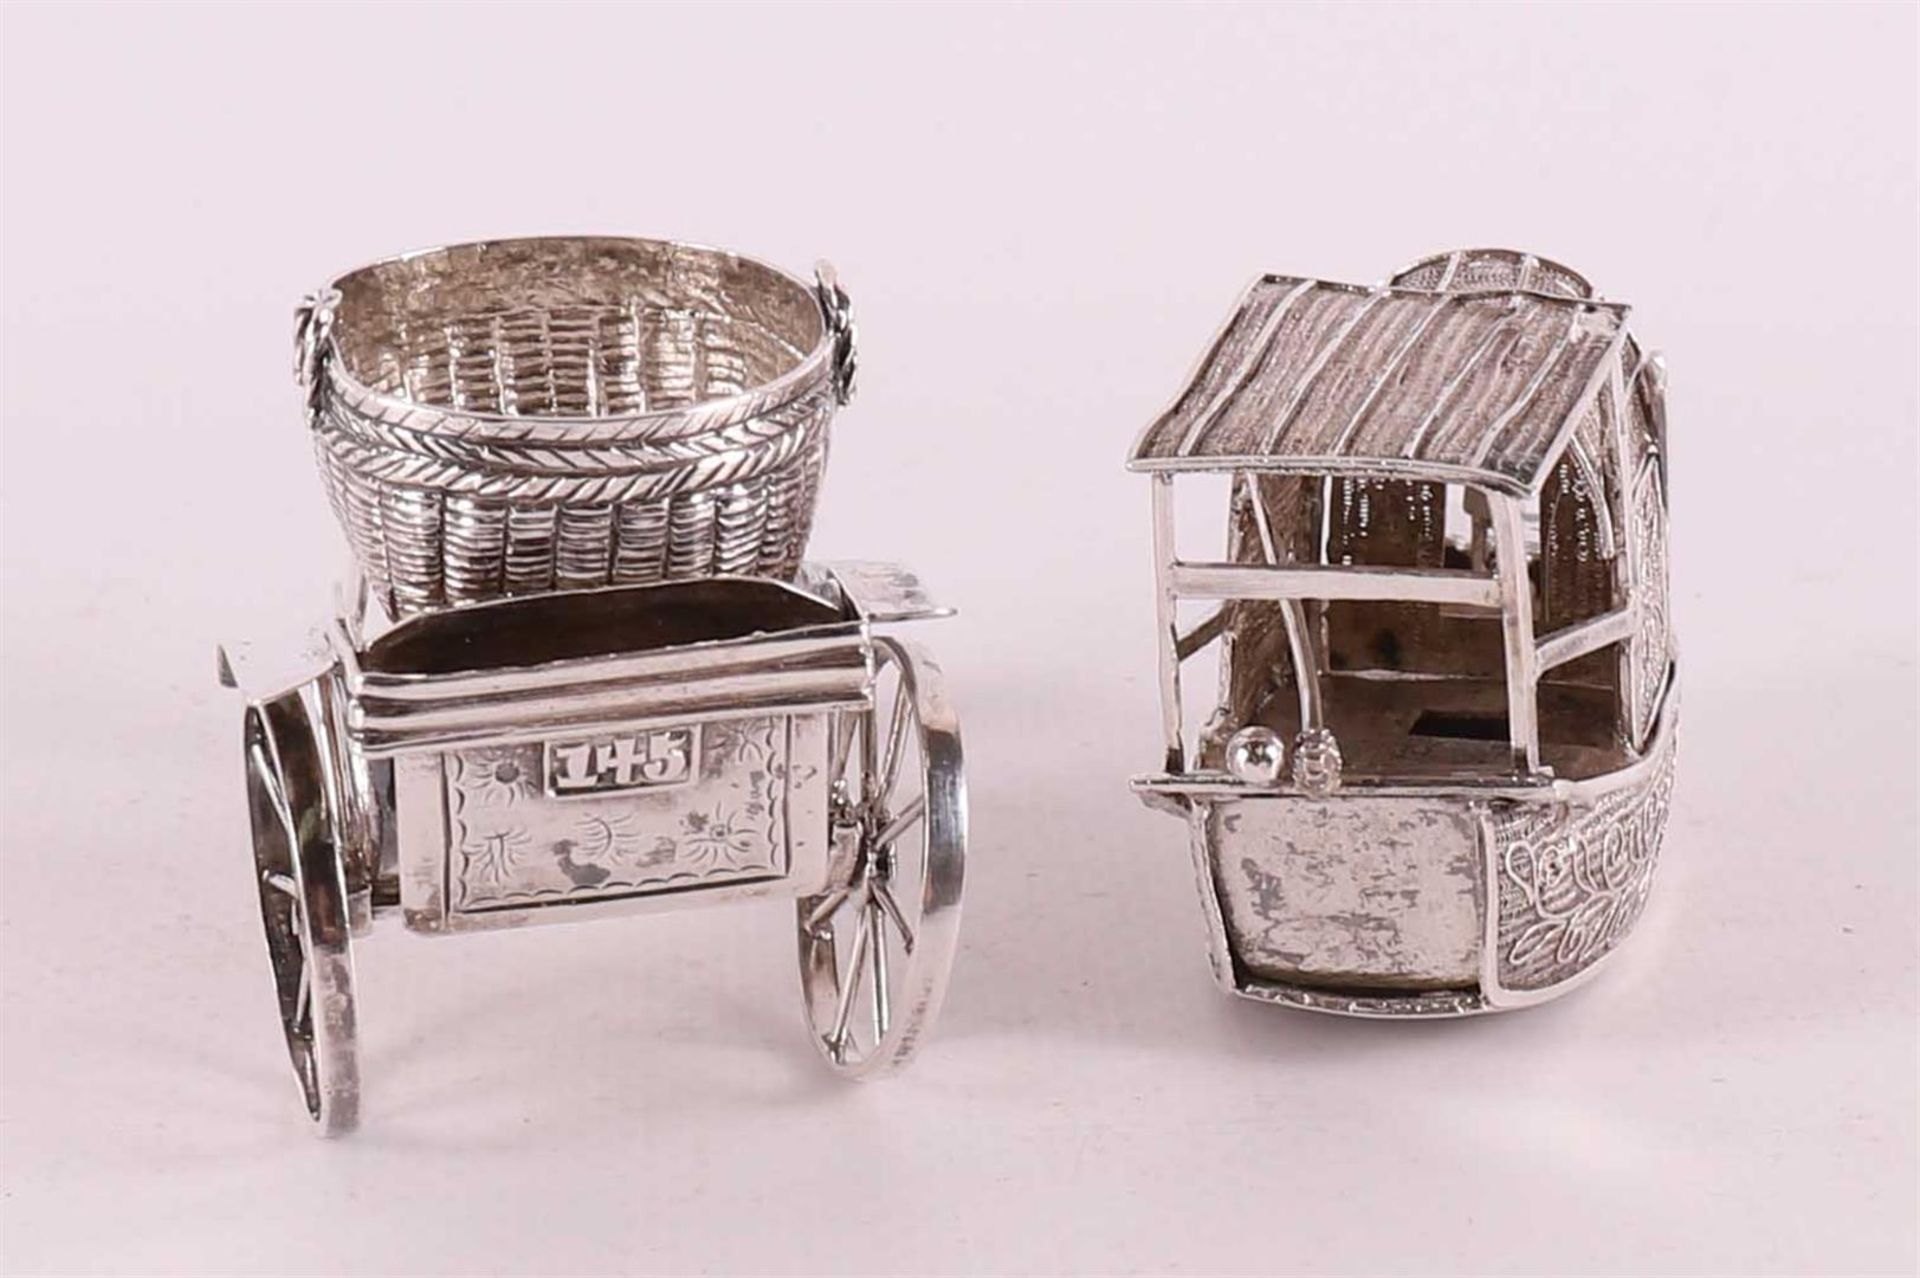 Etagere silver. A rickshaw with basket + boat, Indonesia, 20th century. - Image 3 of 3